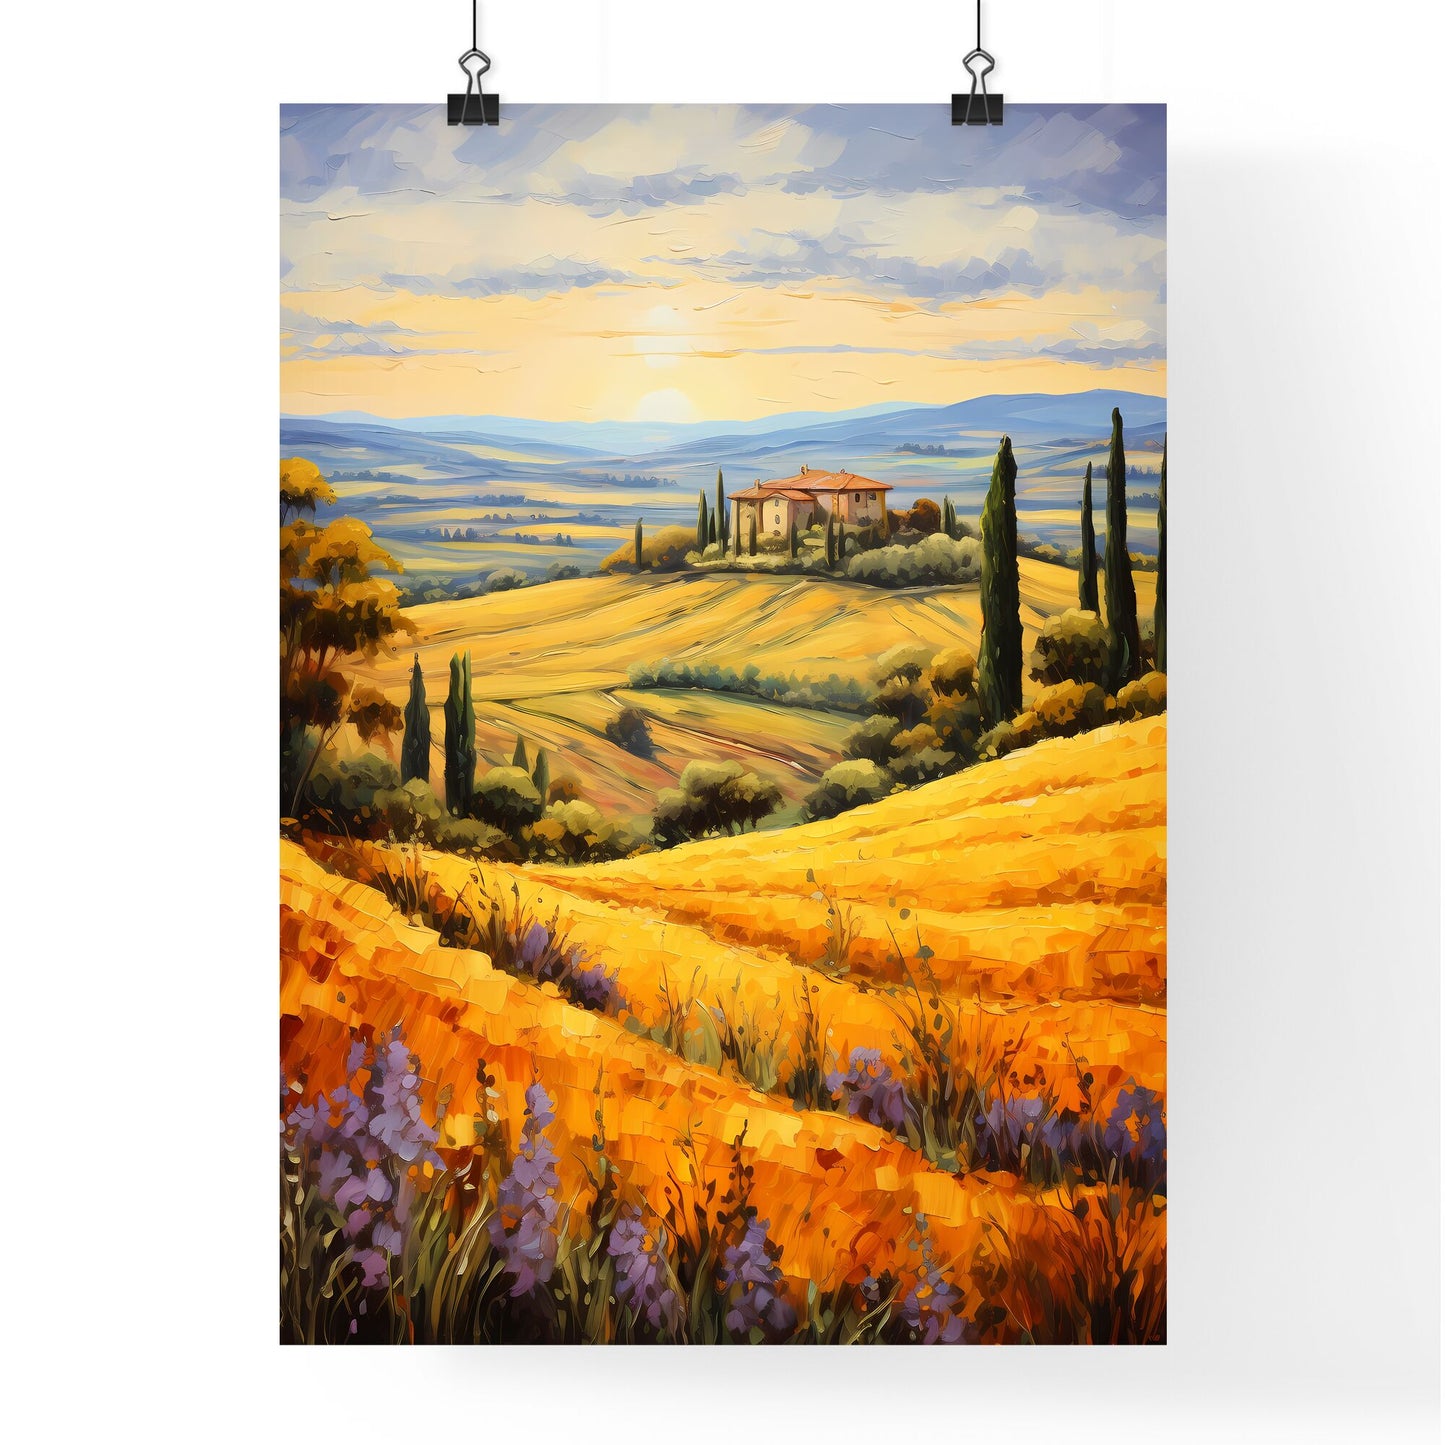 Painting Of A House In A Field Of Yellow Flowers Art Print Default Title